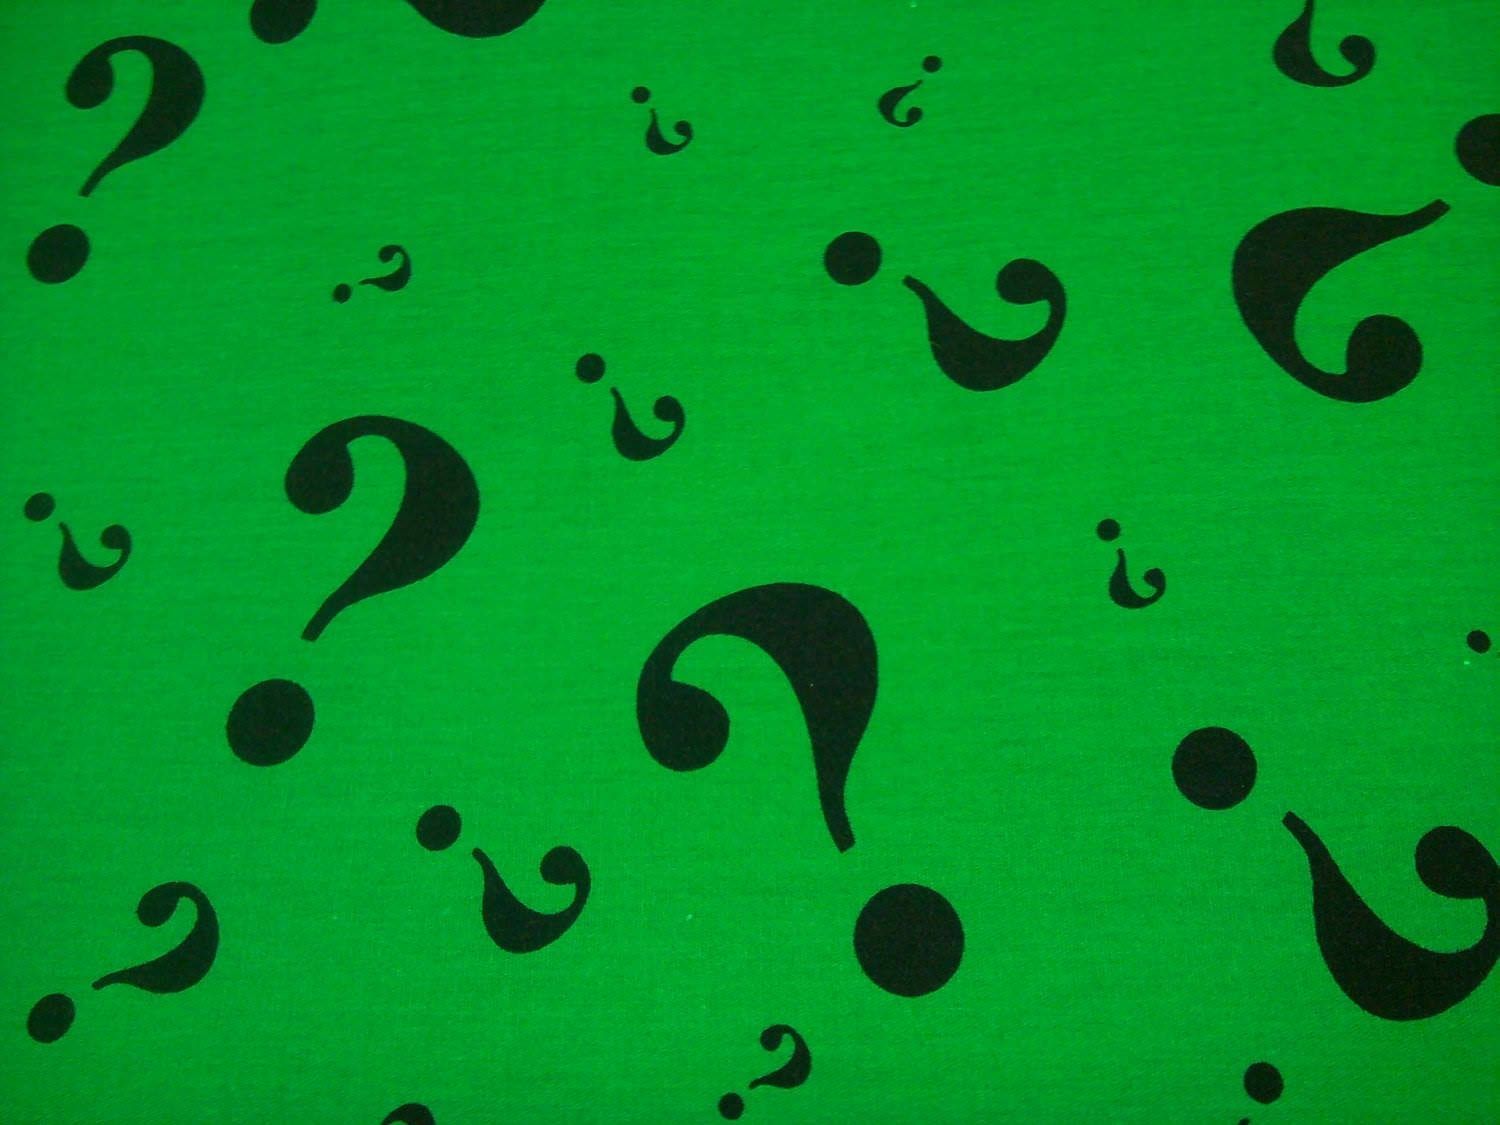 Most Popular Riddler Question Mark Wallpaper FULL HD 1080p For PC Desktop. This or that questions, Riddles, Riddler